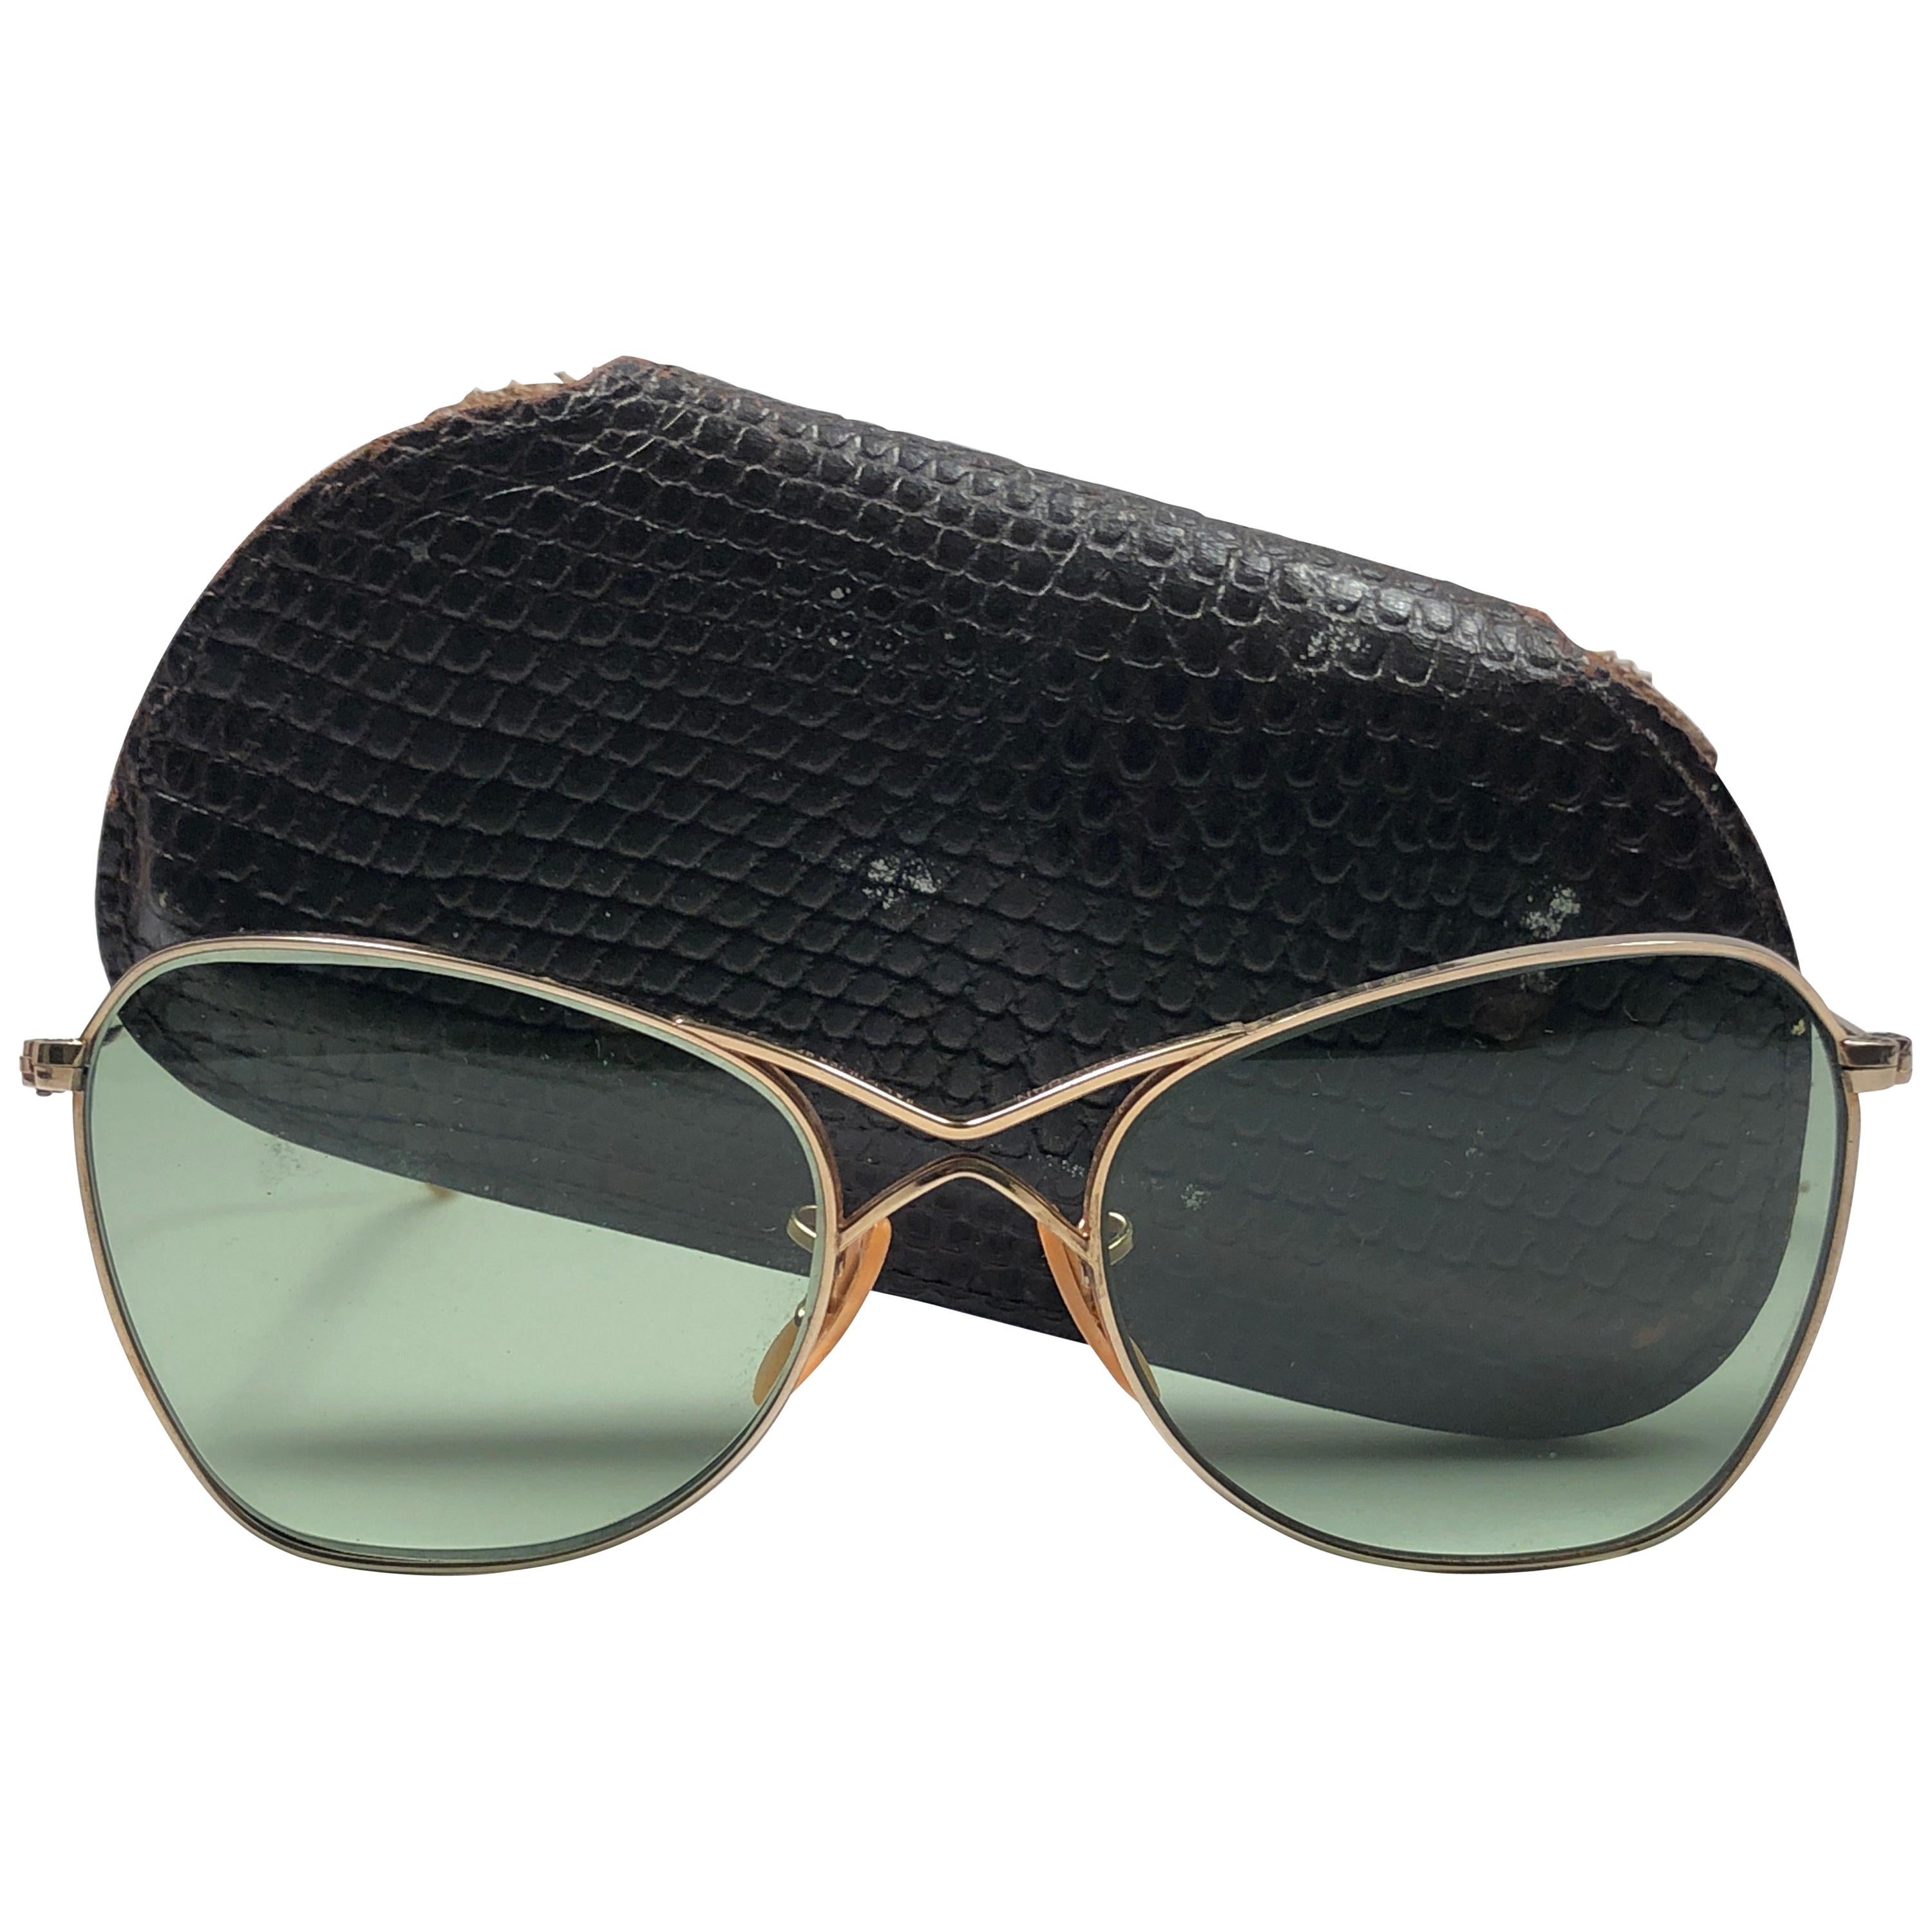 Rare Vintage 1940's Ray Ban Smallest Size 12K Gold Filled B&L Sunglasses